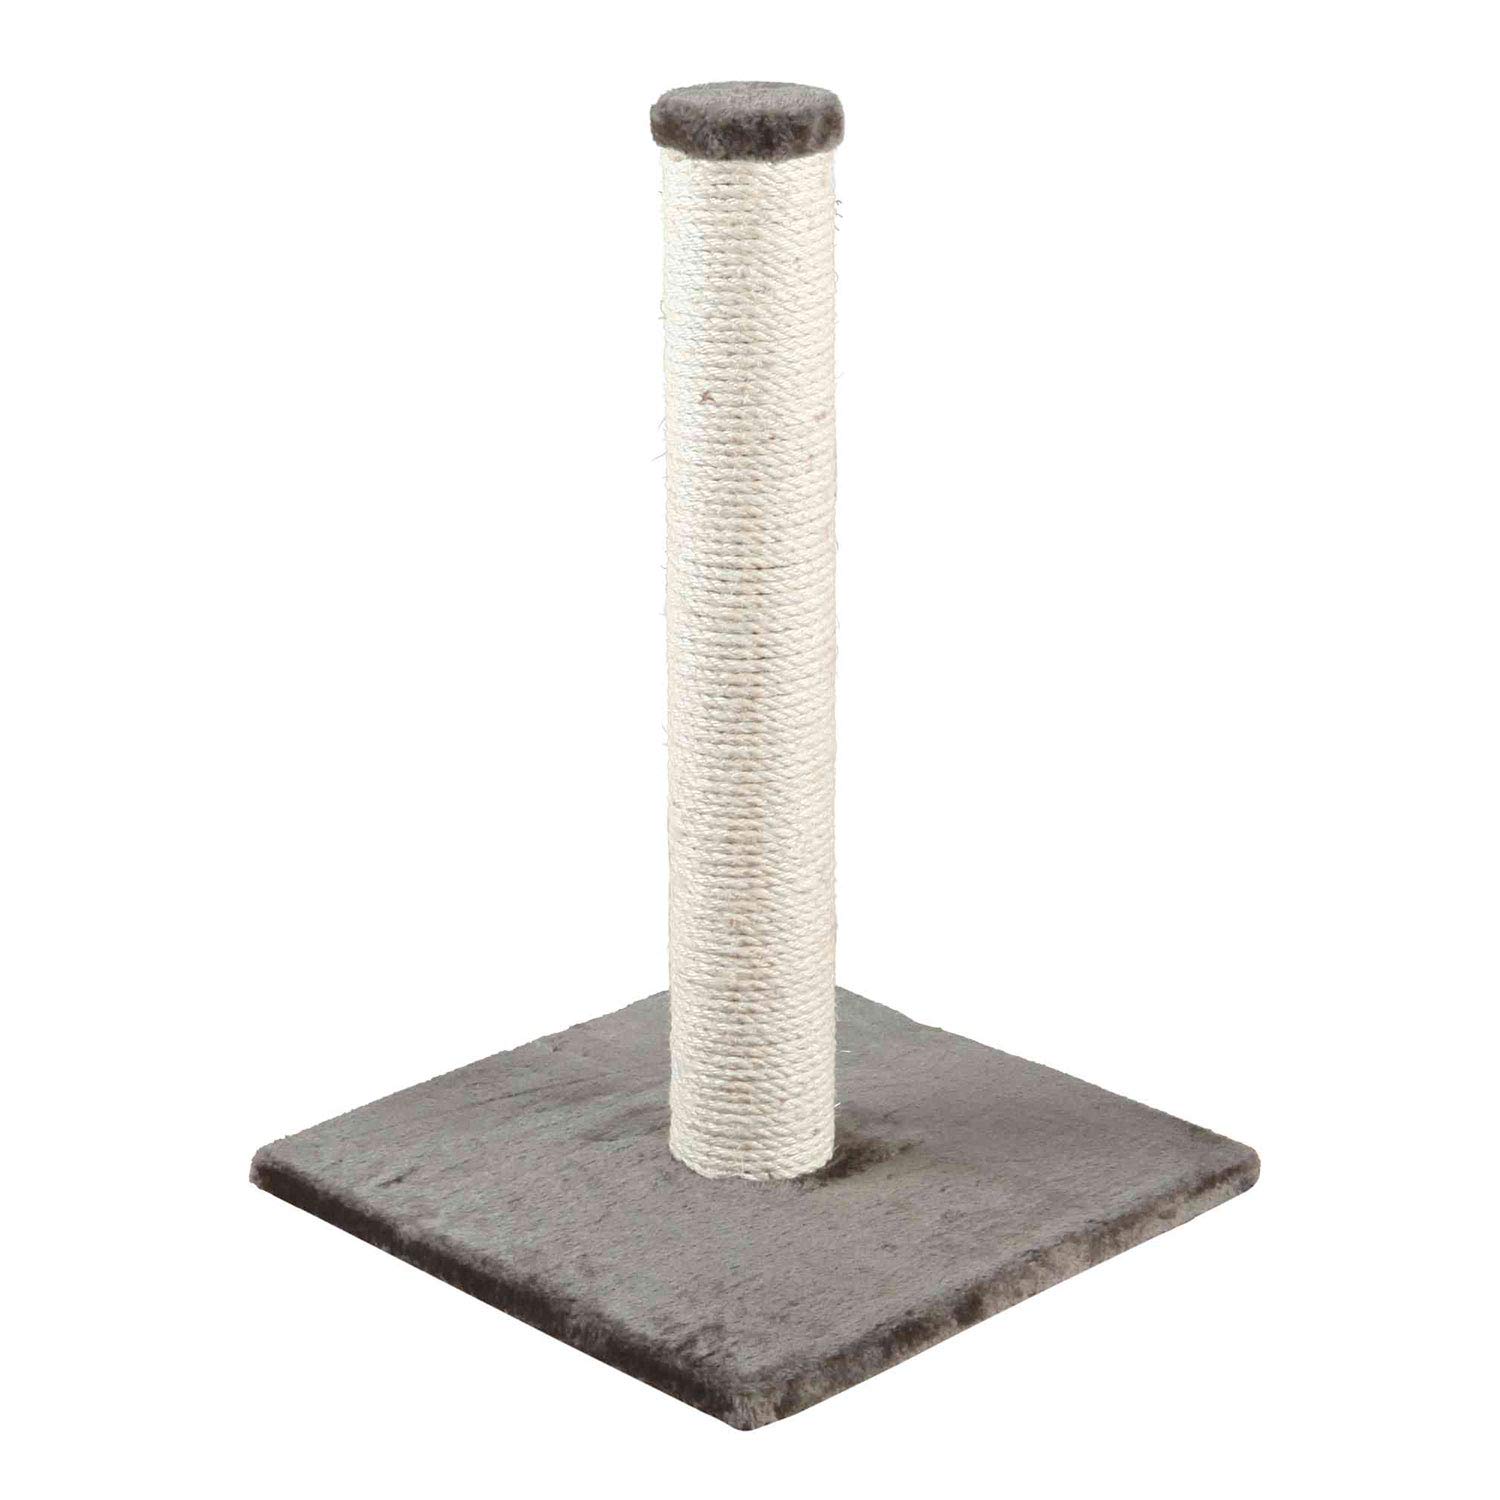 Trixie Pet Products Parla Scratching Post, Gray